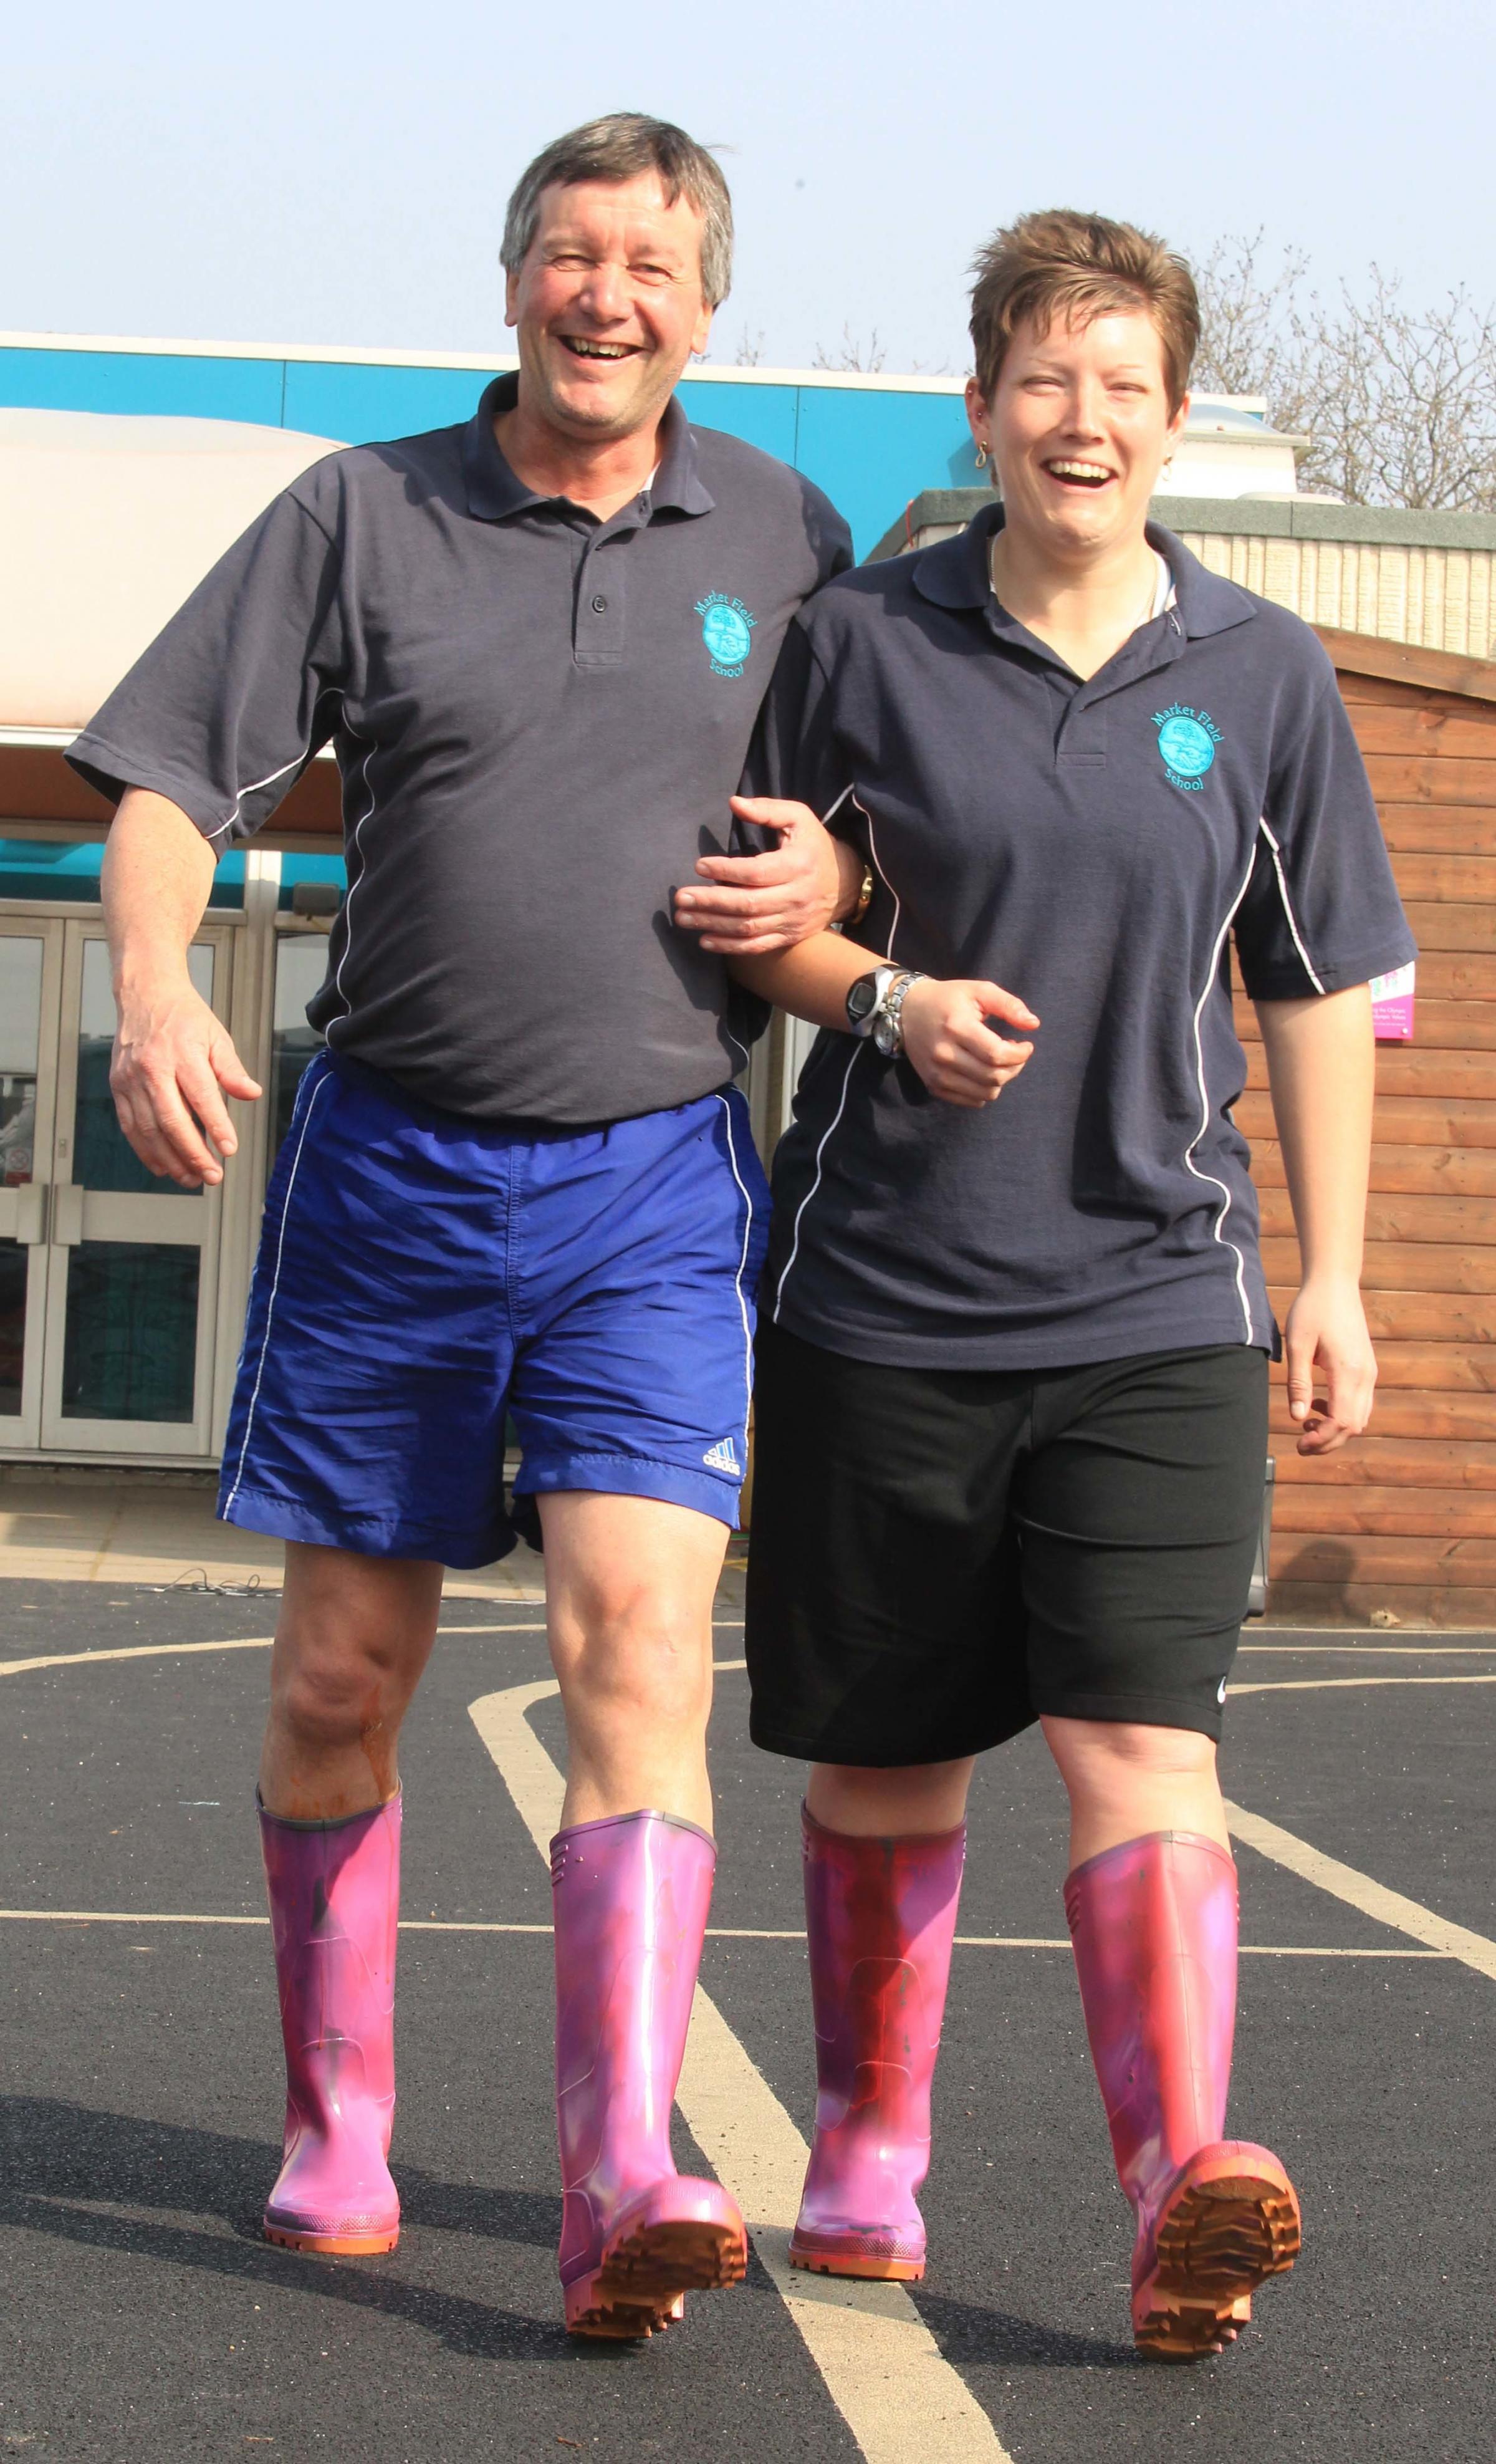 nigel brown Gary Smith, head teacher and Jamie Newstead , will be running the Sports Relief mile in wellies filled with baked beans, on Friday at Market Field School, School Road, Elmstead Market.